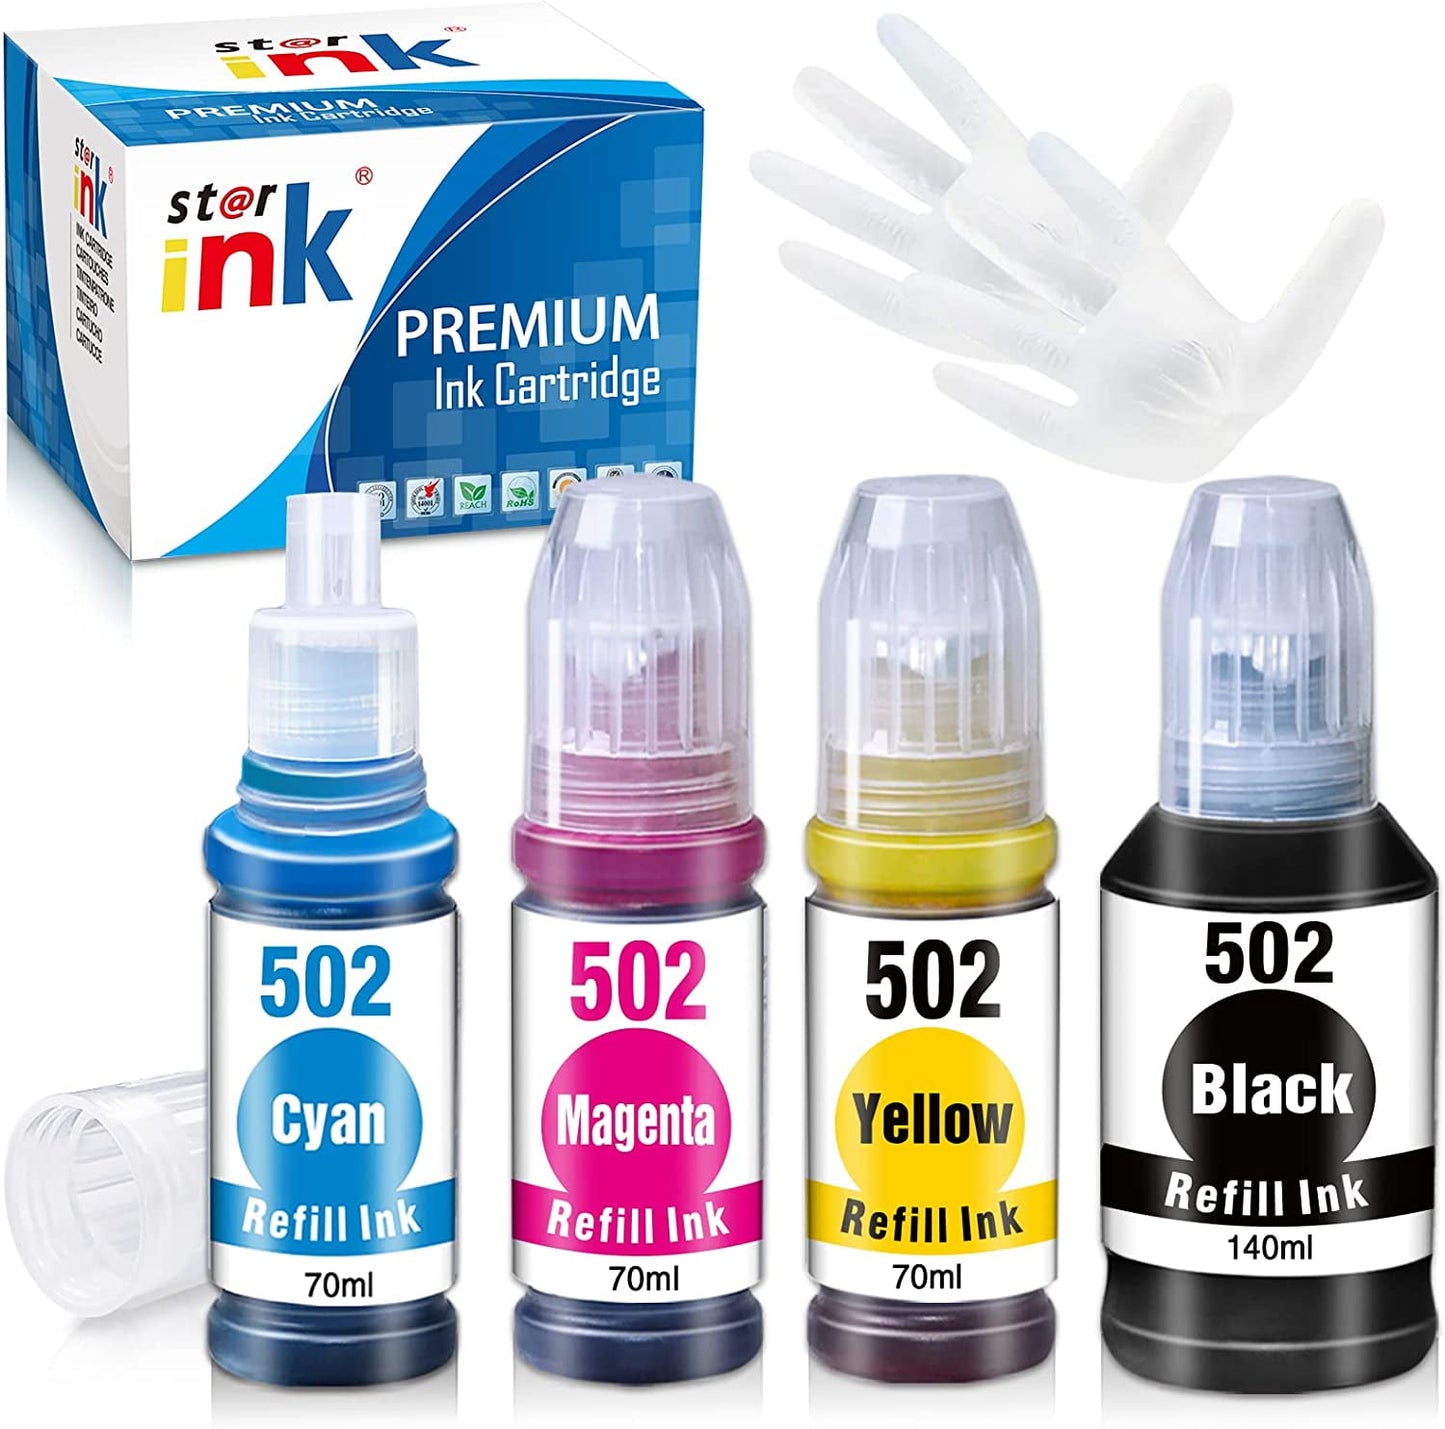 502 Ink Bottle Replacement for Epson 502 T502 Ecotank Refill Ink for ET-15000 ET-2760 ET-3710 ET-2750 ET-3700 ET-4760 ET-3750 Printer (Black, Cyan, Magenta, Yellow, 4 Pack)